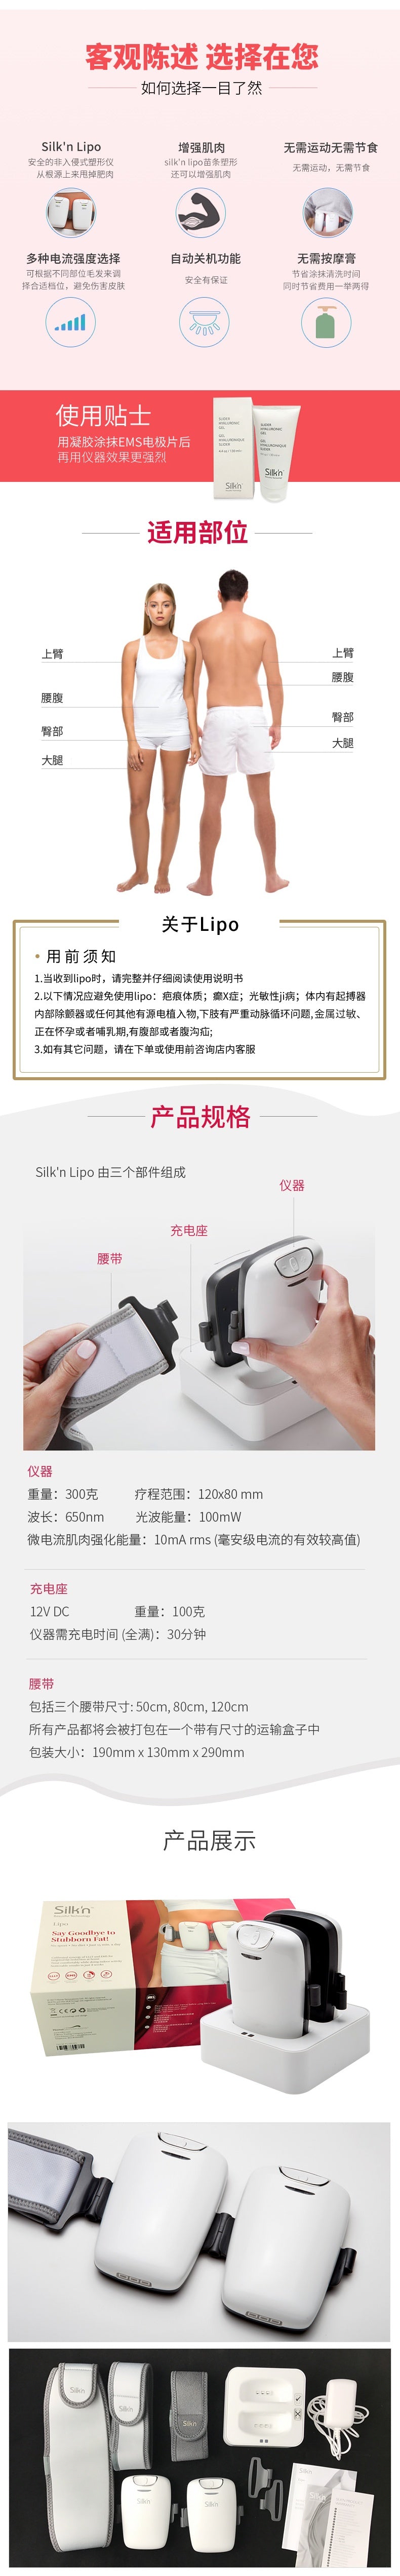 Features and device specification of Silk'n Lipo cellulite removal machine fat reduction machine, use together with Silk'n hyaluronic slider gel for best results - Silk'n Lipo Fat Reduction Device - BeautyFoo Mall Malaysia